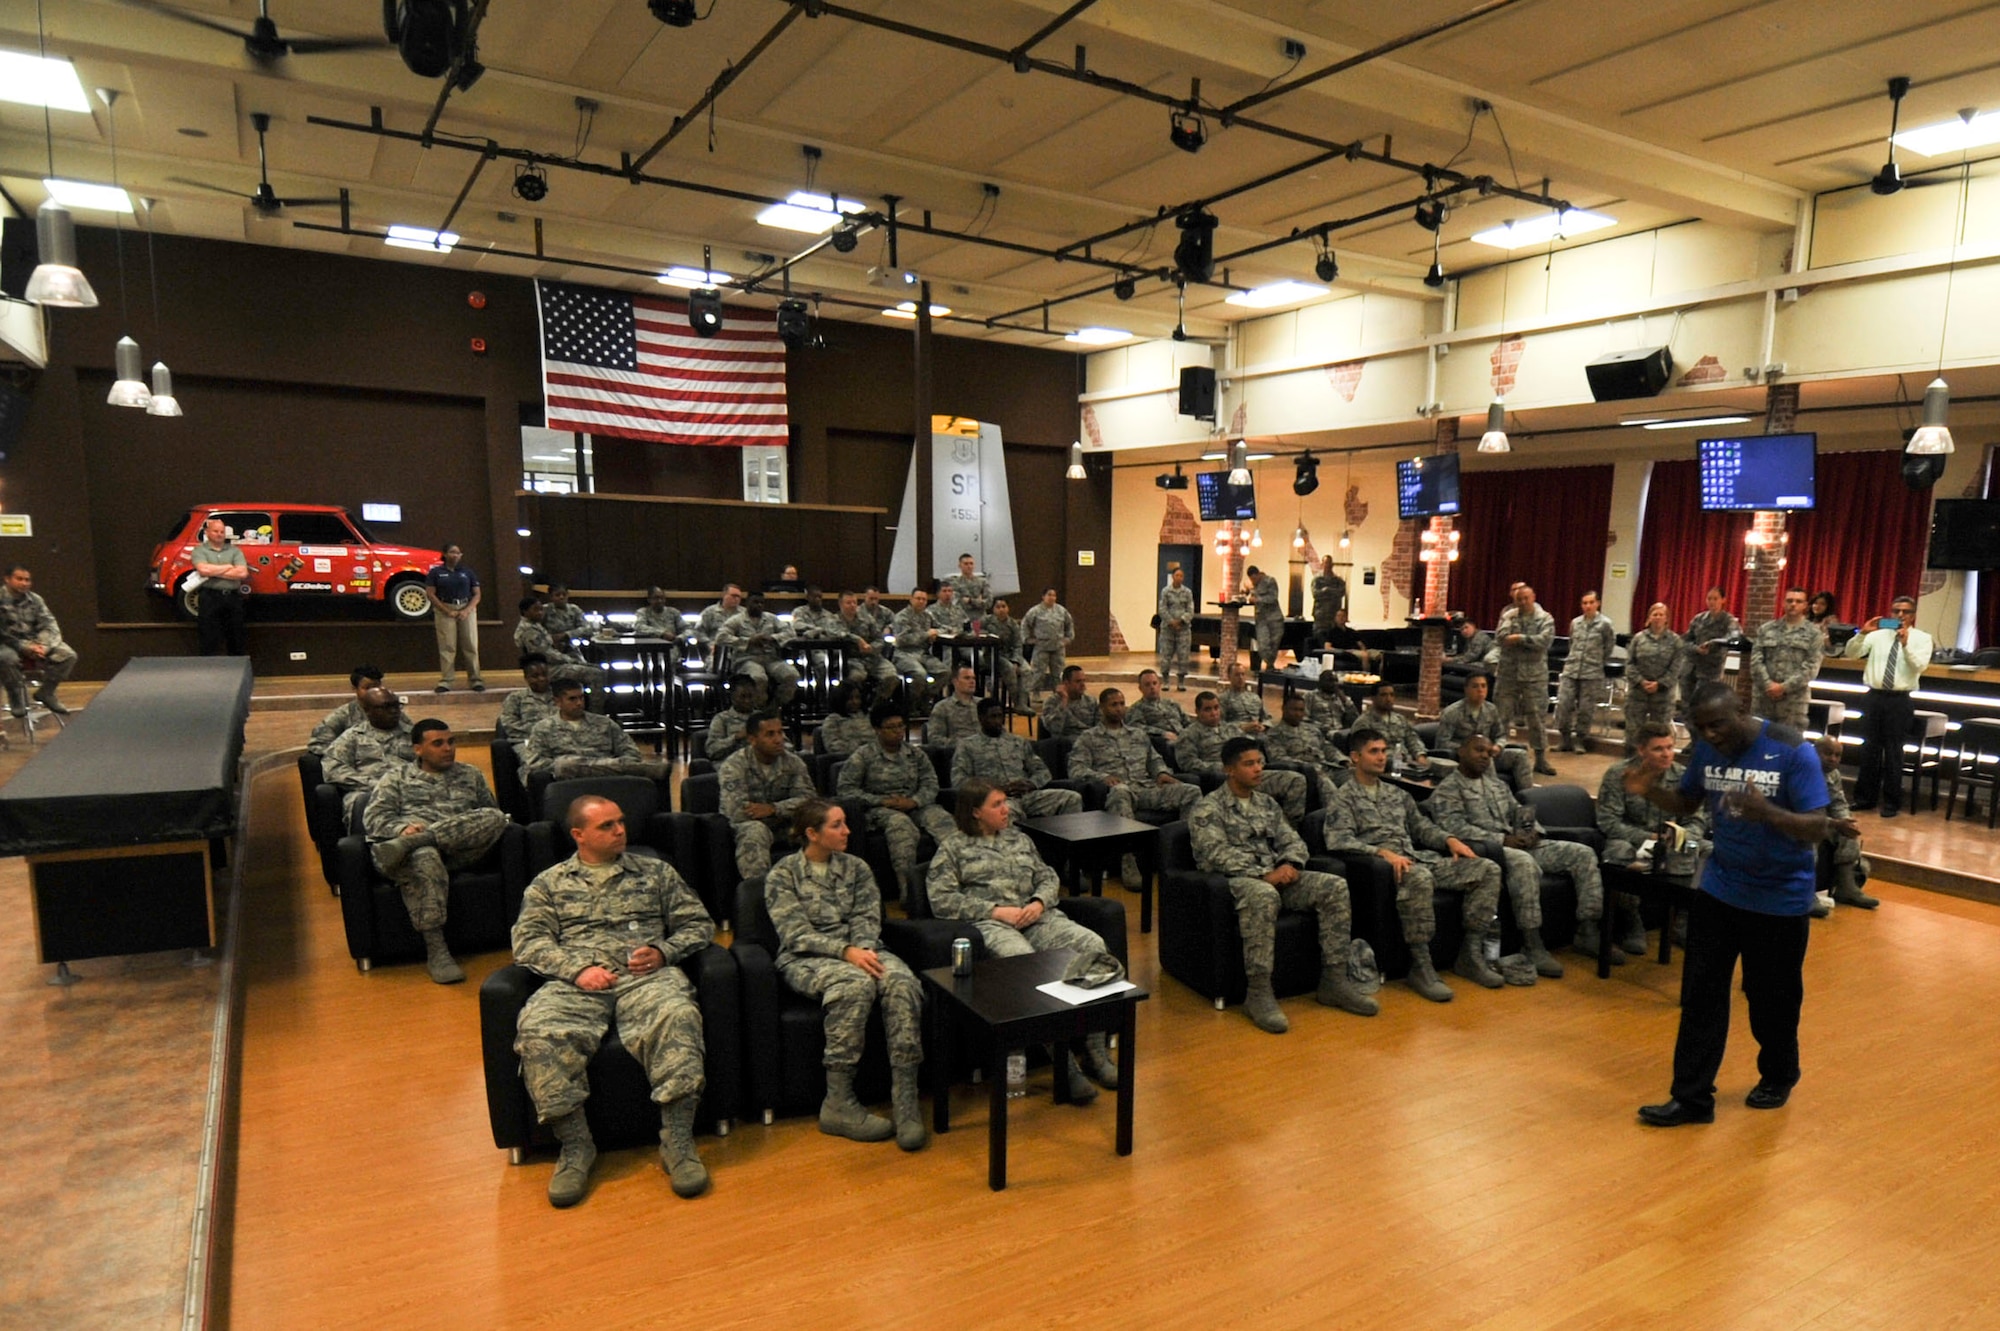 Retired U.S. Air Force Chief Master Sgt. Juan Lewis, known as the Fired Up Chief, speaks to NCOs during a Tier II private organization meeting at the Brick House on Spangdahlem Air Base, Germany, July 12, 2016. Lewis spoke to NCOs about PEP, meaning pride, enthusiasm and passion, as part of his pep rally presentation. (U.S. Air Force Photo by Staff Sgt. Joe W. McFadden/Released)